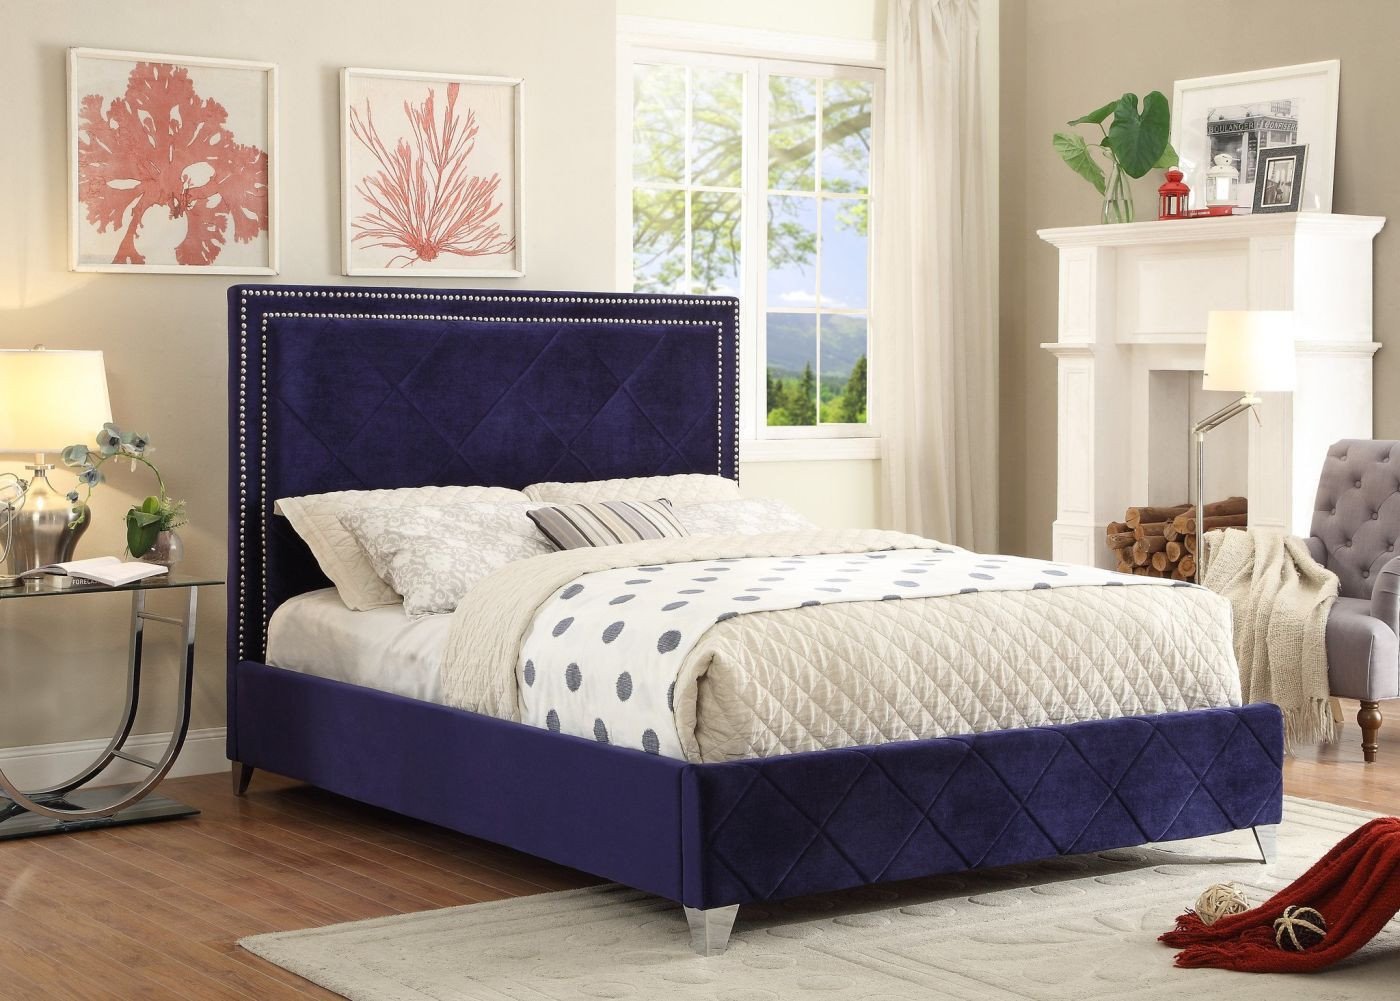 cheap quality bedroom furniture uk